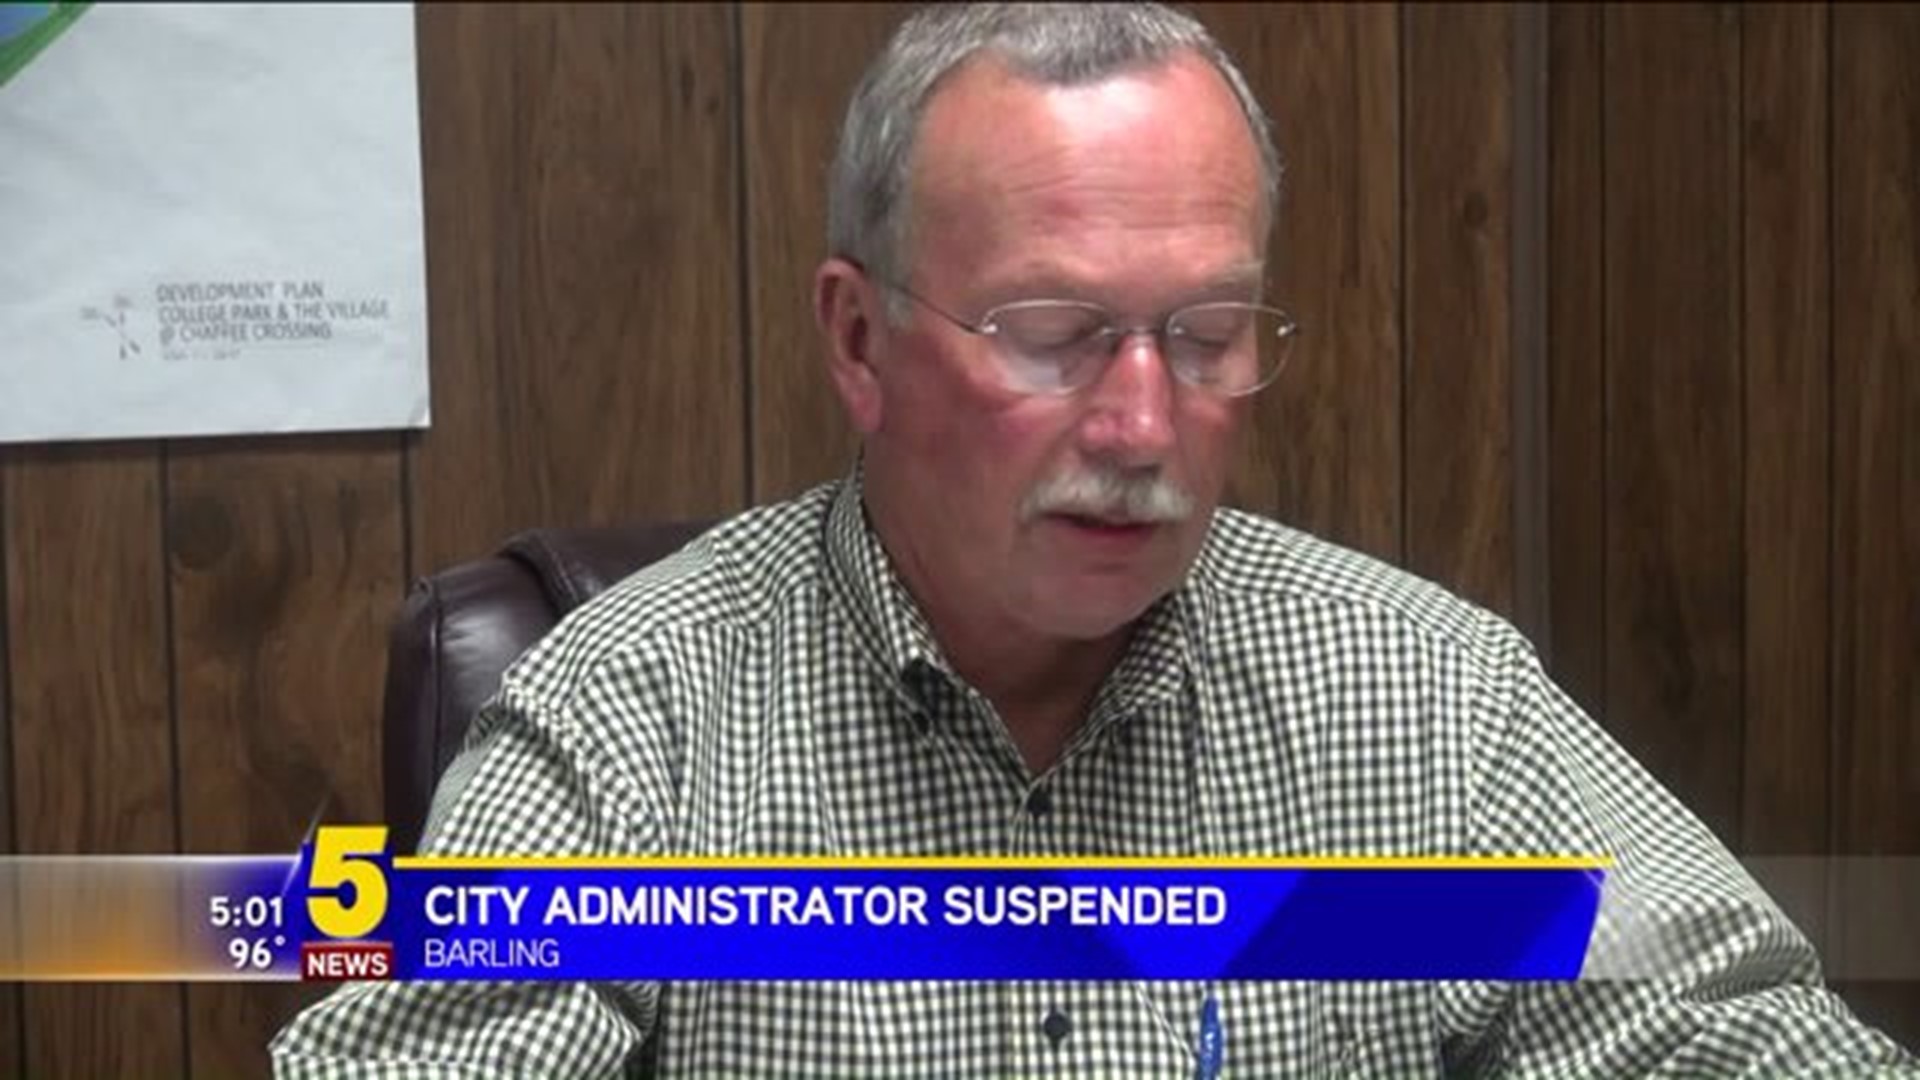 Barling City Administrator Suspended Without Pay